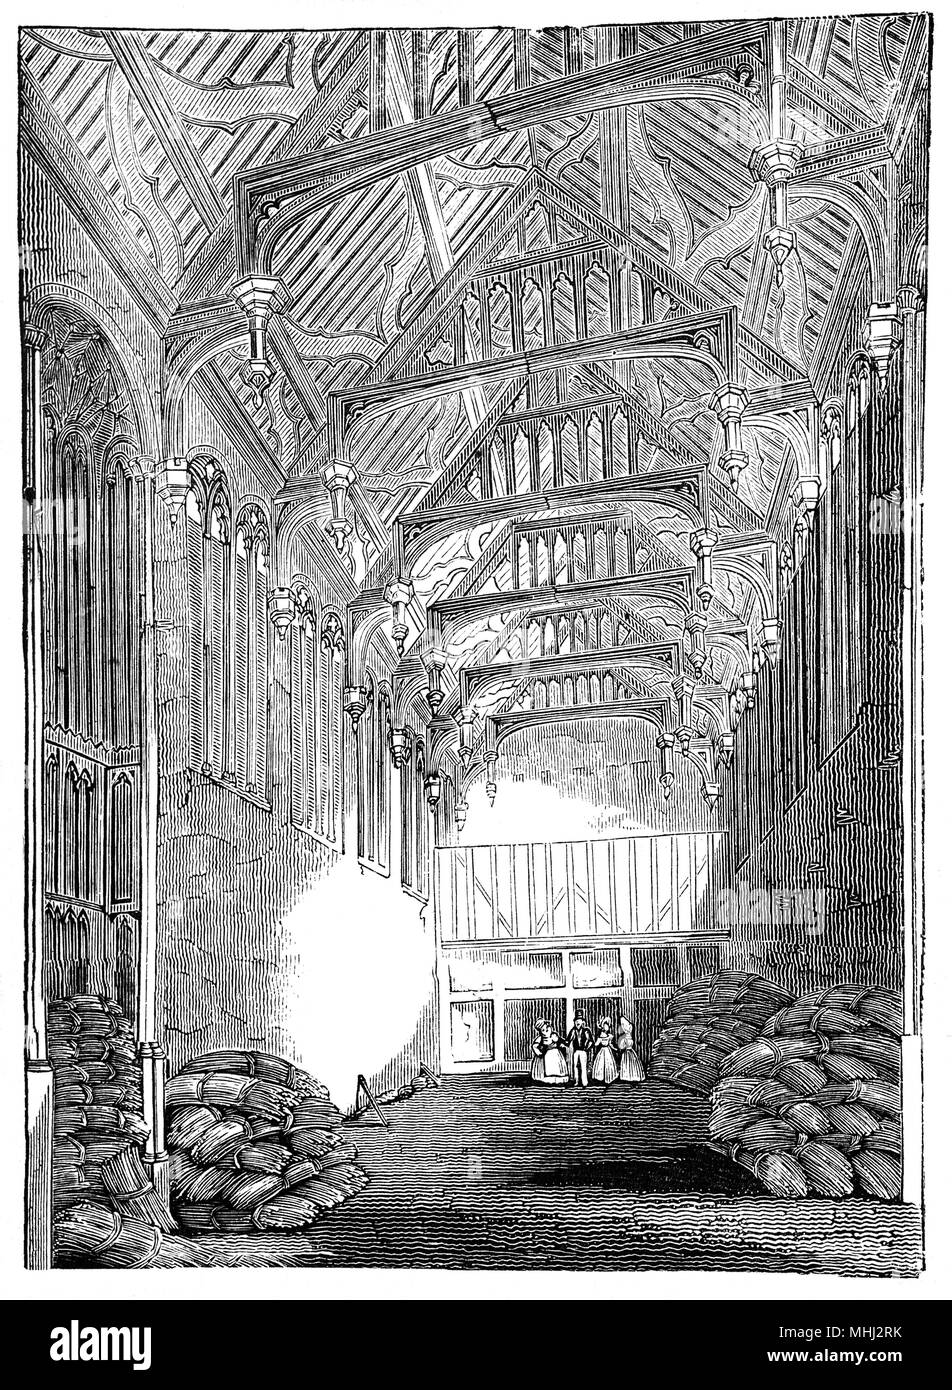 The Great Hall in Eltham Palace, a large house in the Royal Borough of Greenwich, in south-east London, England was given to Edward II in 1305 by the Bishop of Durham, Anthony Bek, and used as a royal residence from the 14th to the 16th century.  Apparantly the incident which inspired Edward III's foundation of the Order of the Garter took place here. Edward IV built the Great Hall in the 1470s, and a young Henry VIII when he was known as Prince Henry also grew up here; it was here in 1499 that he met and impressed the scholar Erasmus, introduced to him by Thomas More. Stock Photo